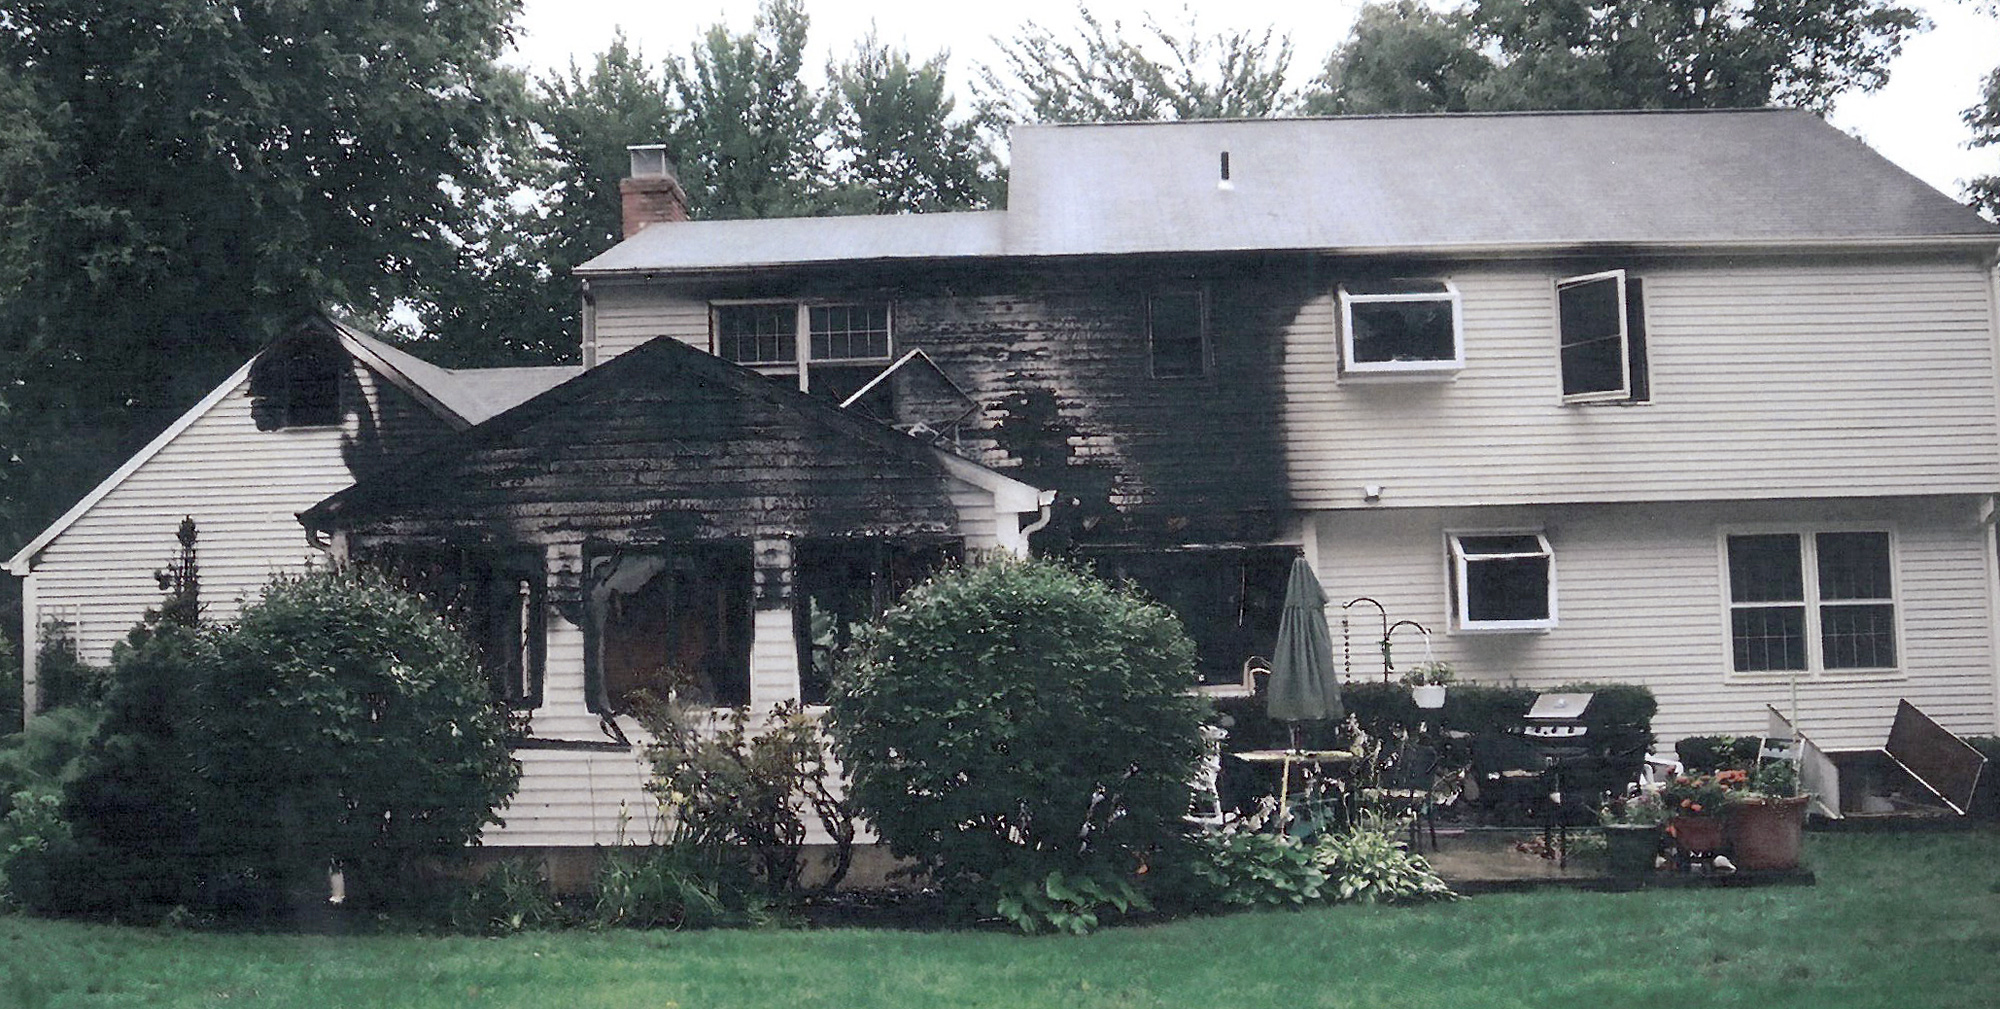 PHOTO: This July 2007 police photo provided by the Connecticut Judicial Branch as evidence and presented in the Joshua Komisarjevsky trial shows a fire-damaged portion of the William Petit home in Cheshire, Conn.